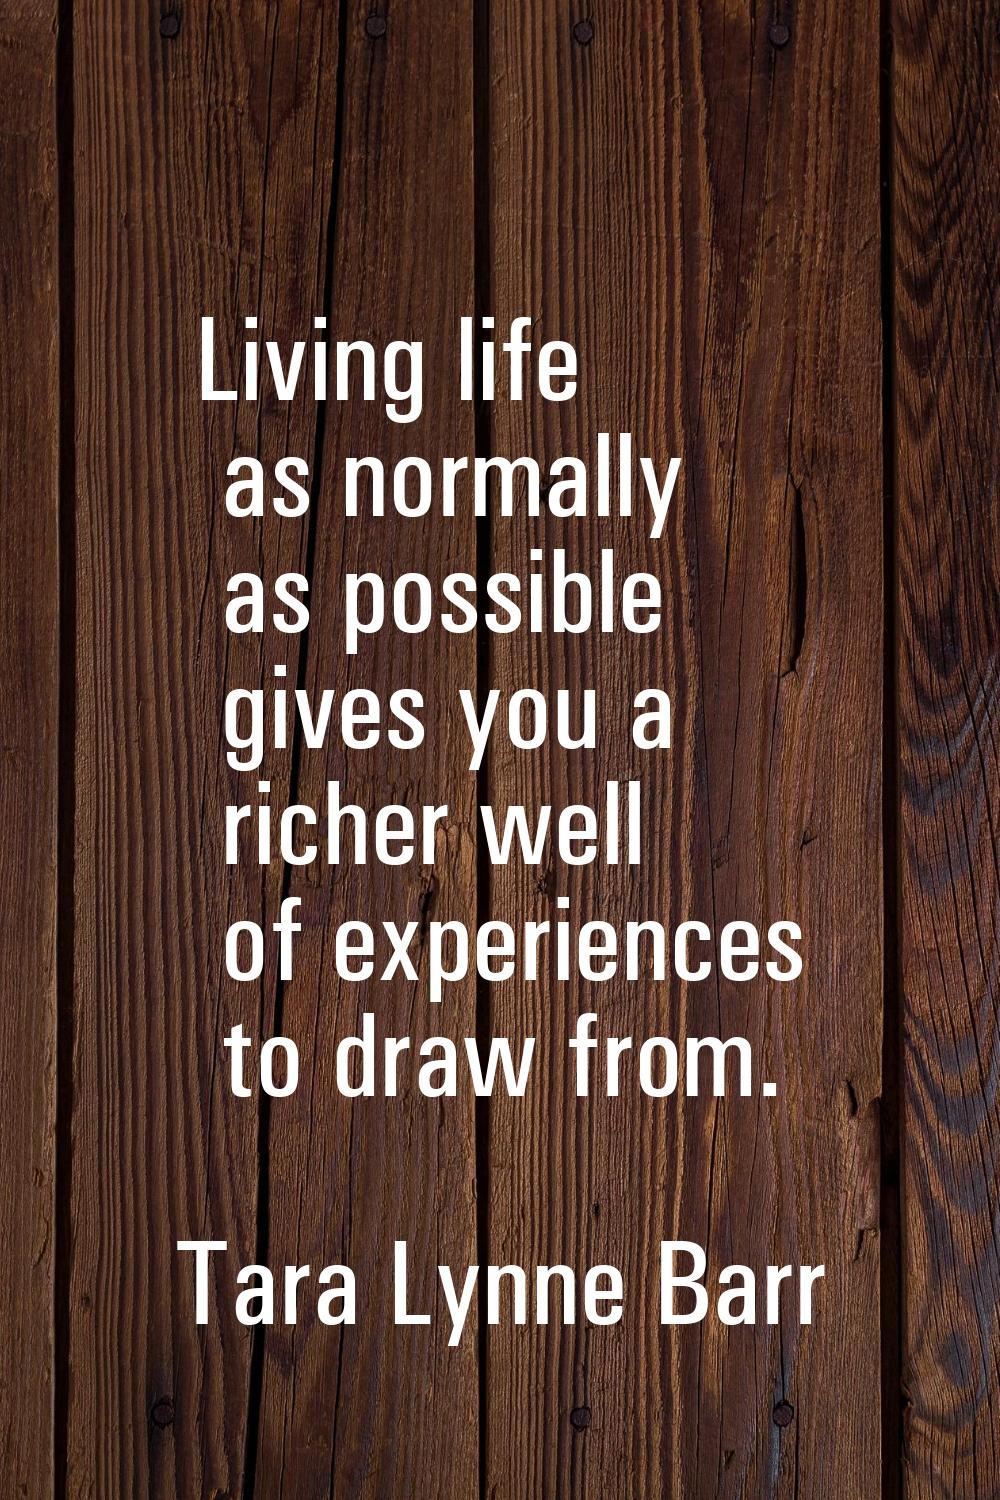 Living life as normally as possible gives you a richer well of experiences to draw from.